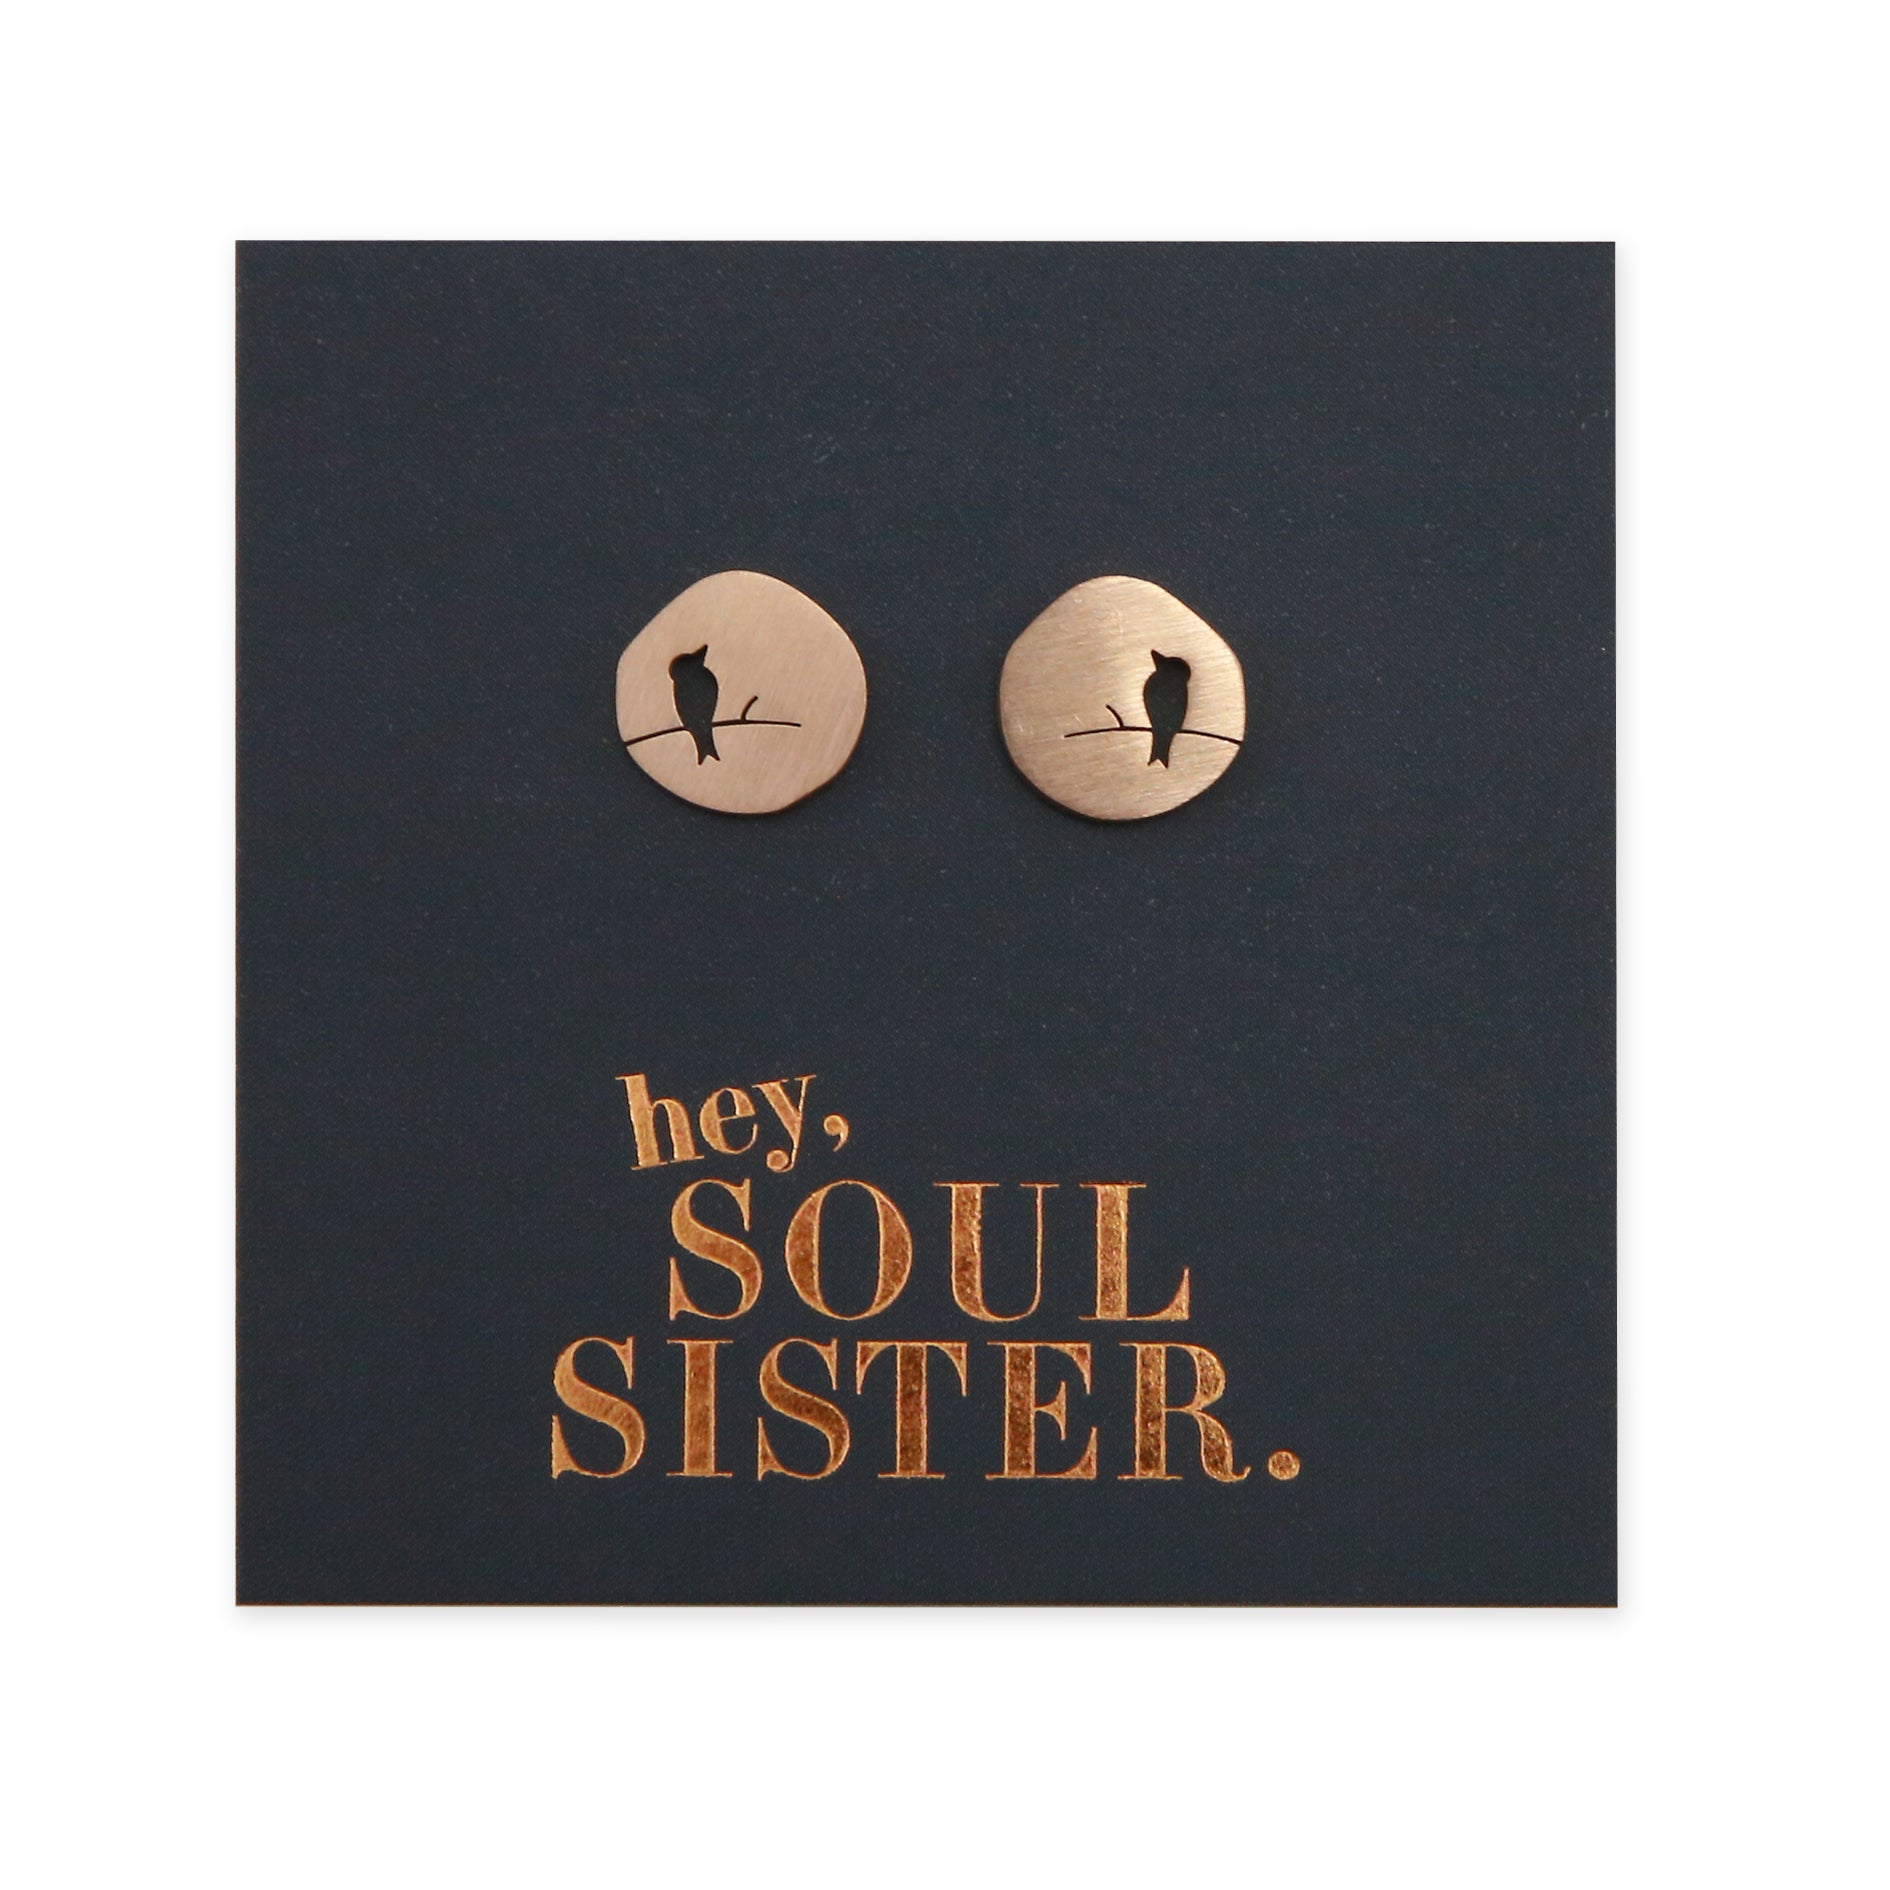 Stainless Steel Earring Studs - Hey Soul Sister - Brushed Rose Gold Bird On A Branch (8212)